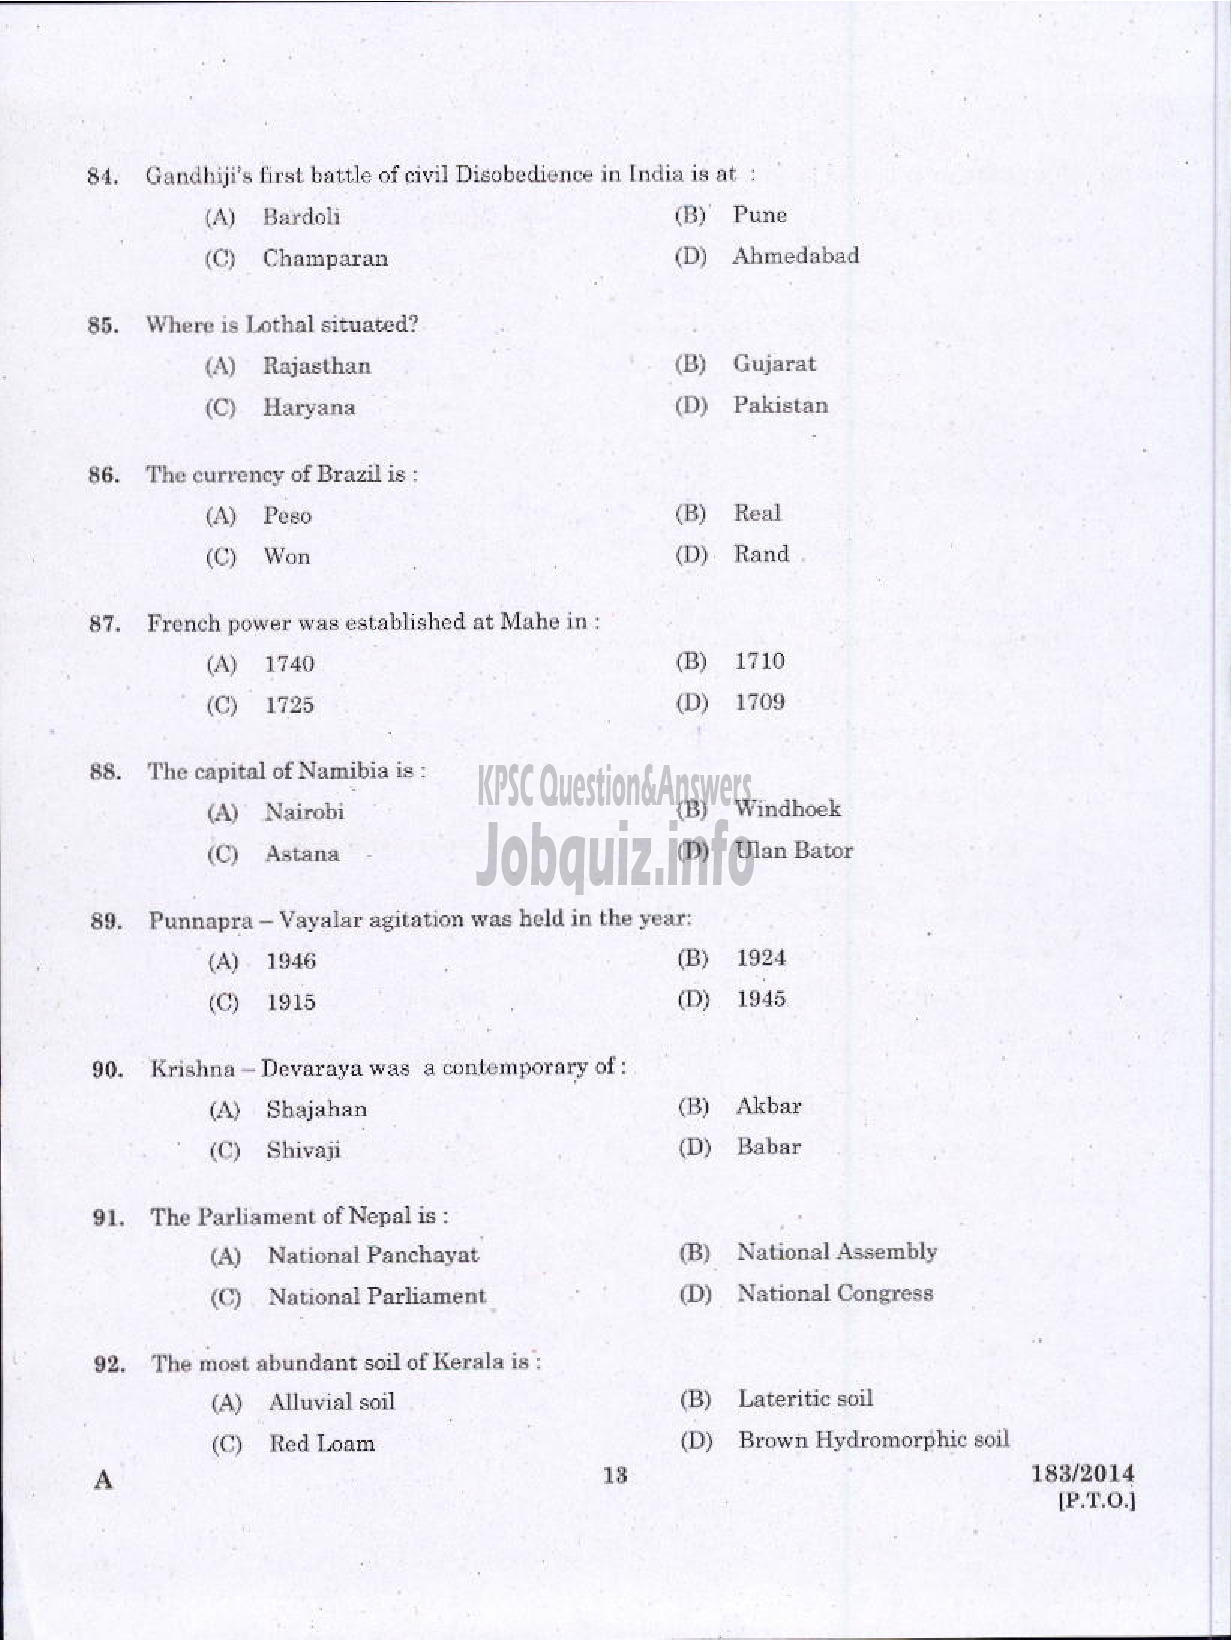 Kerala PSC Question Paper - TRADESMAN COMPUTER ENGINEERING TECHNICAL EDUCATION TVM KGD-11